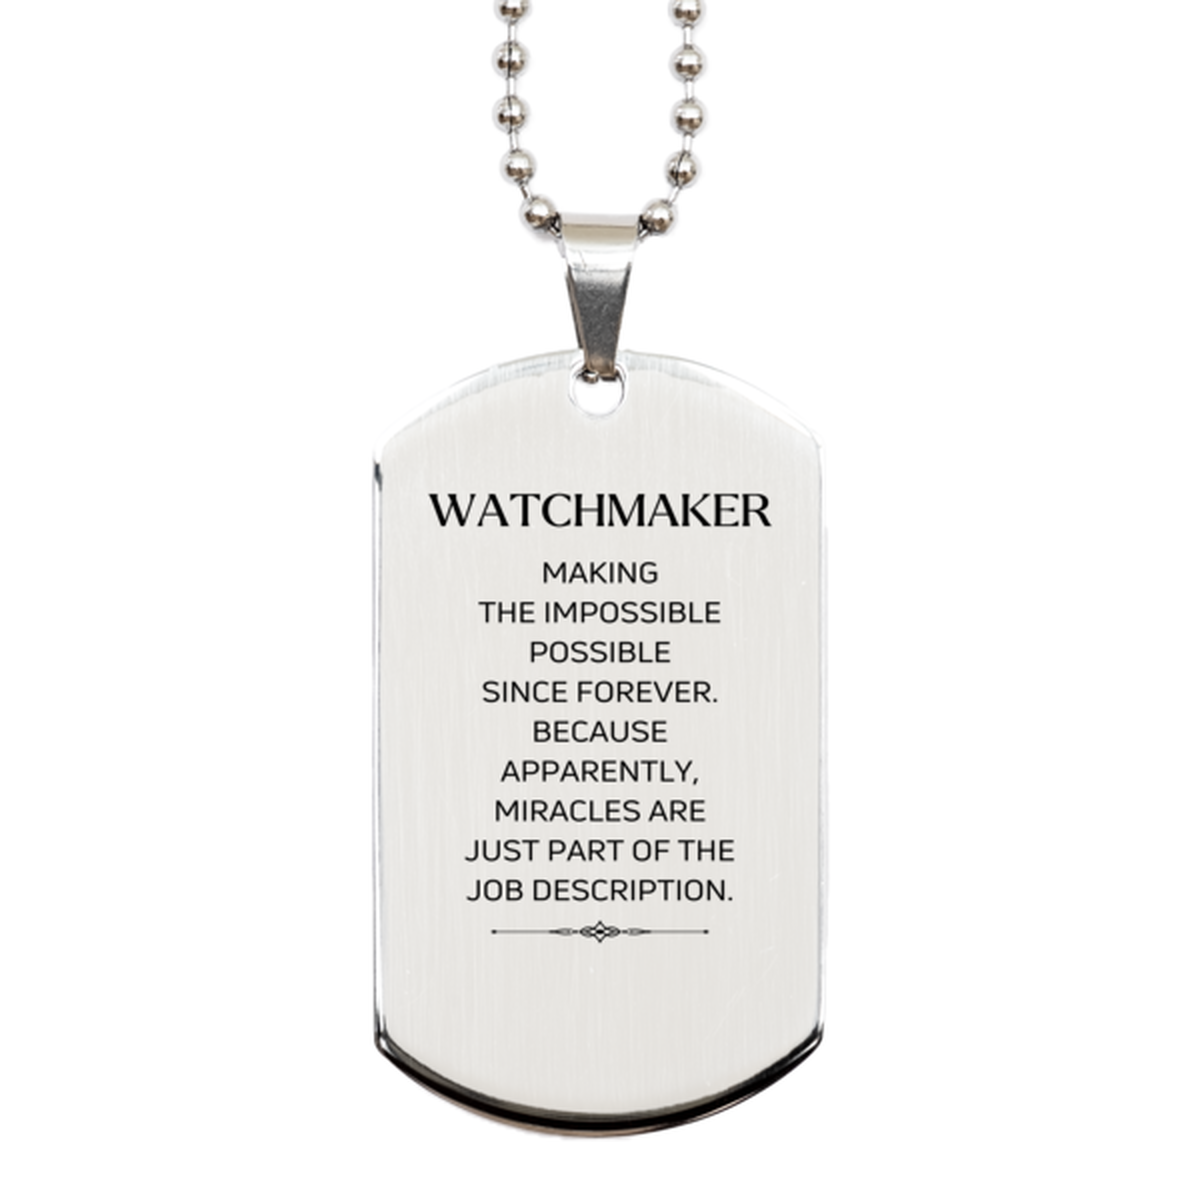 Funny Watchmaker Gifts, Miracles are just part of the job description, Inspirational Birthday Silver Dog Tag For Watchmaker, Men, Women, Coworkers, Friends, Boss